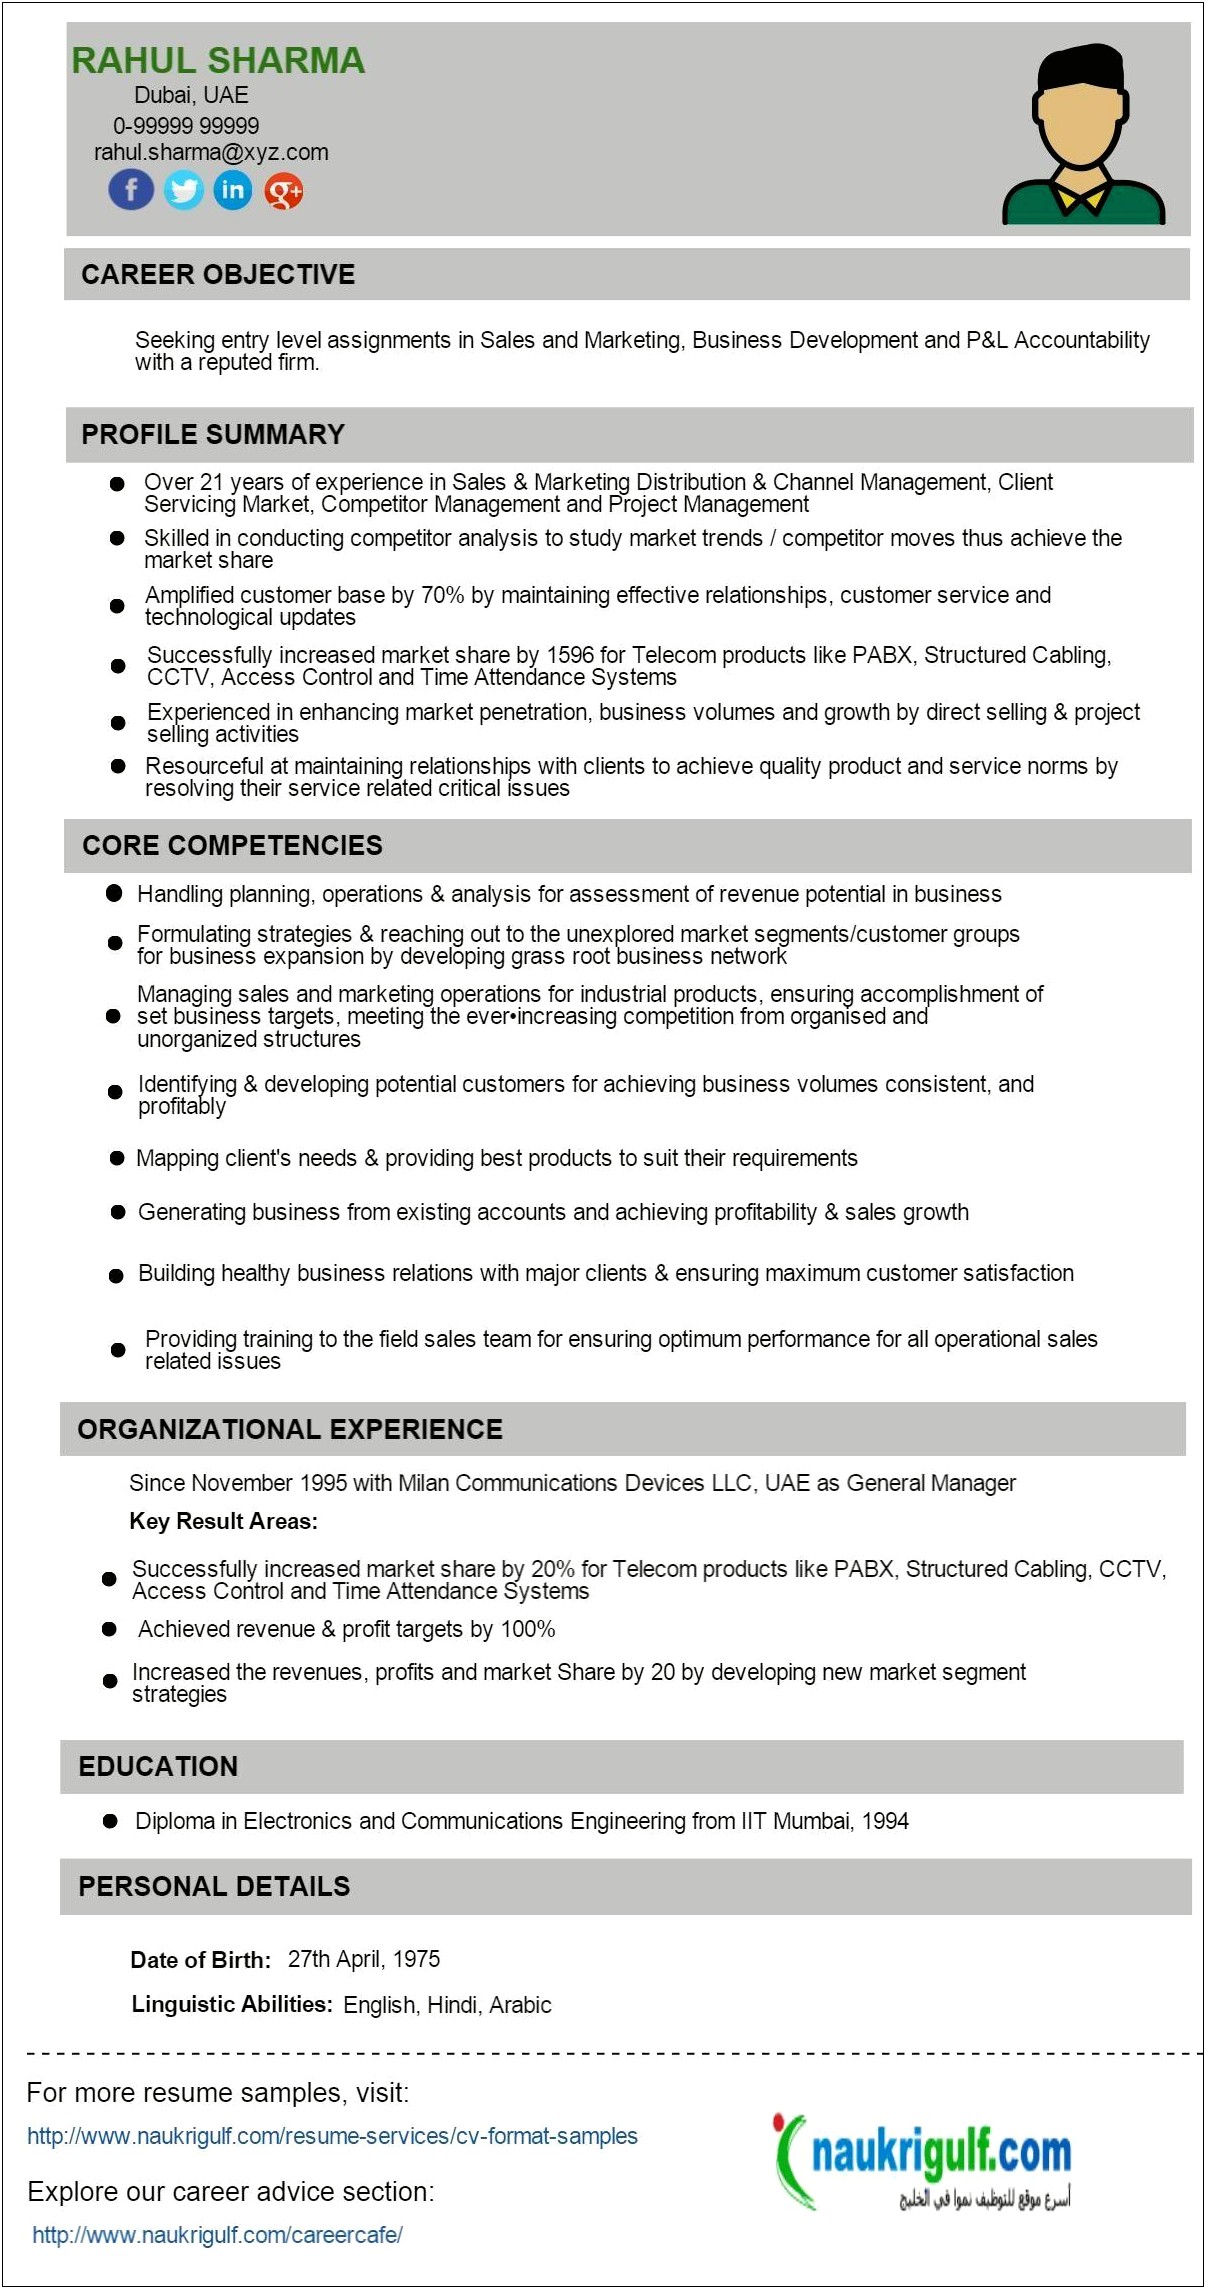 Resume Objective For Business Development Executive